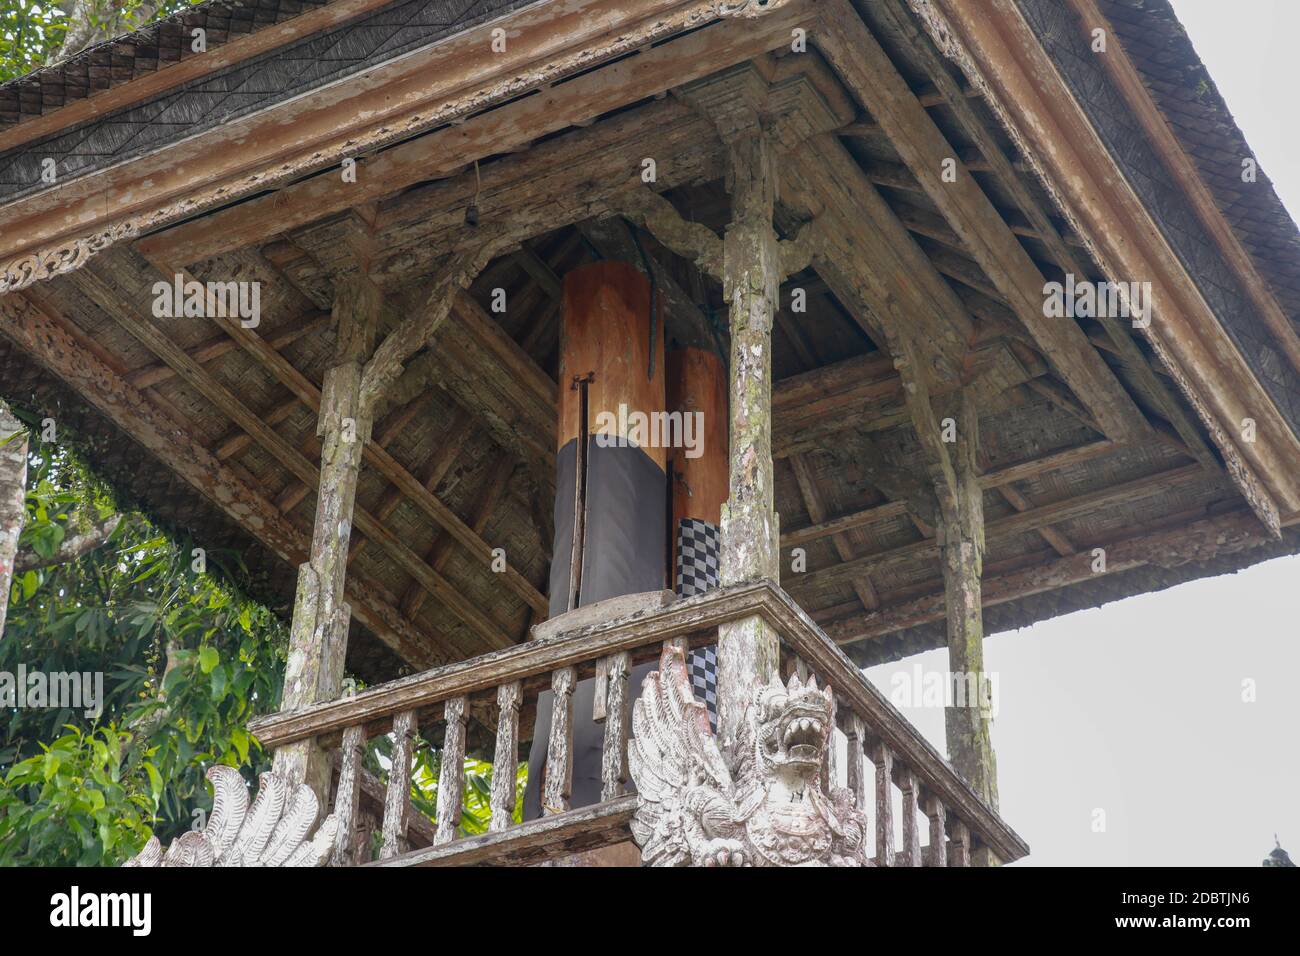 Wooden bell with a mallet made from a tree trunk. Bale Kulkul is building to hand up the traditional alarm for local Balinese people when they are inv Stock Photo